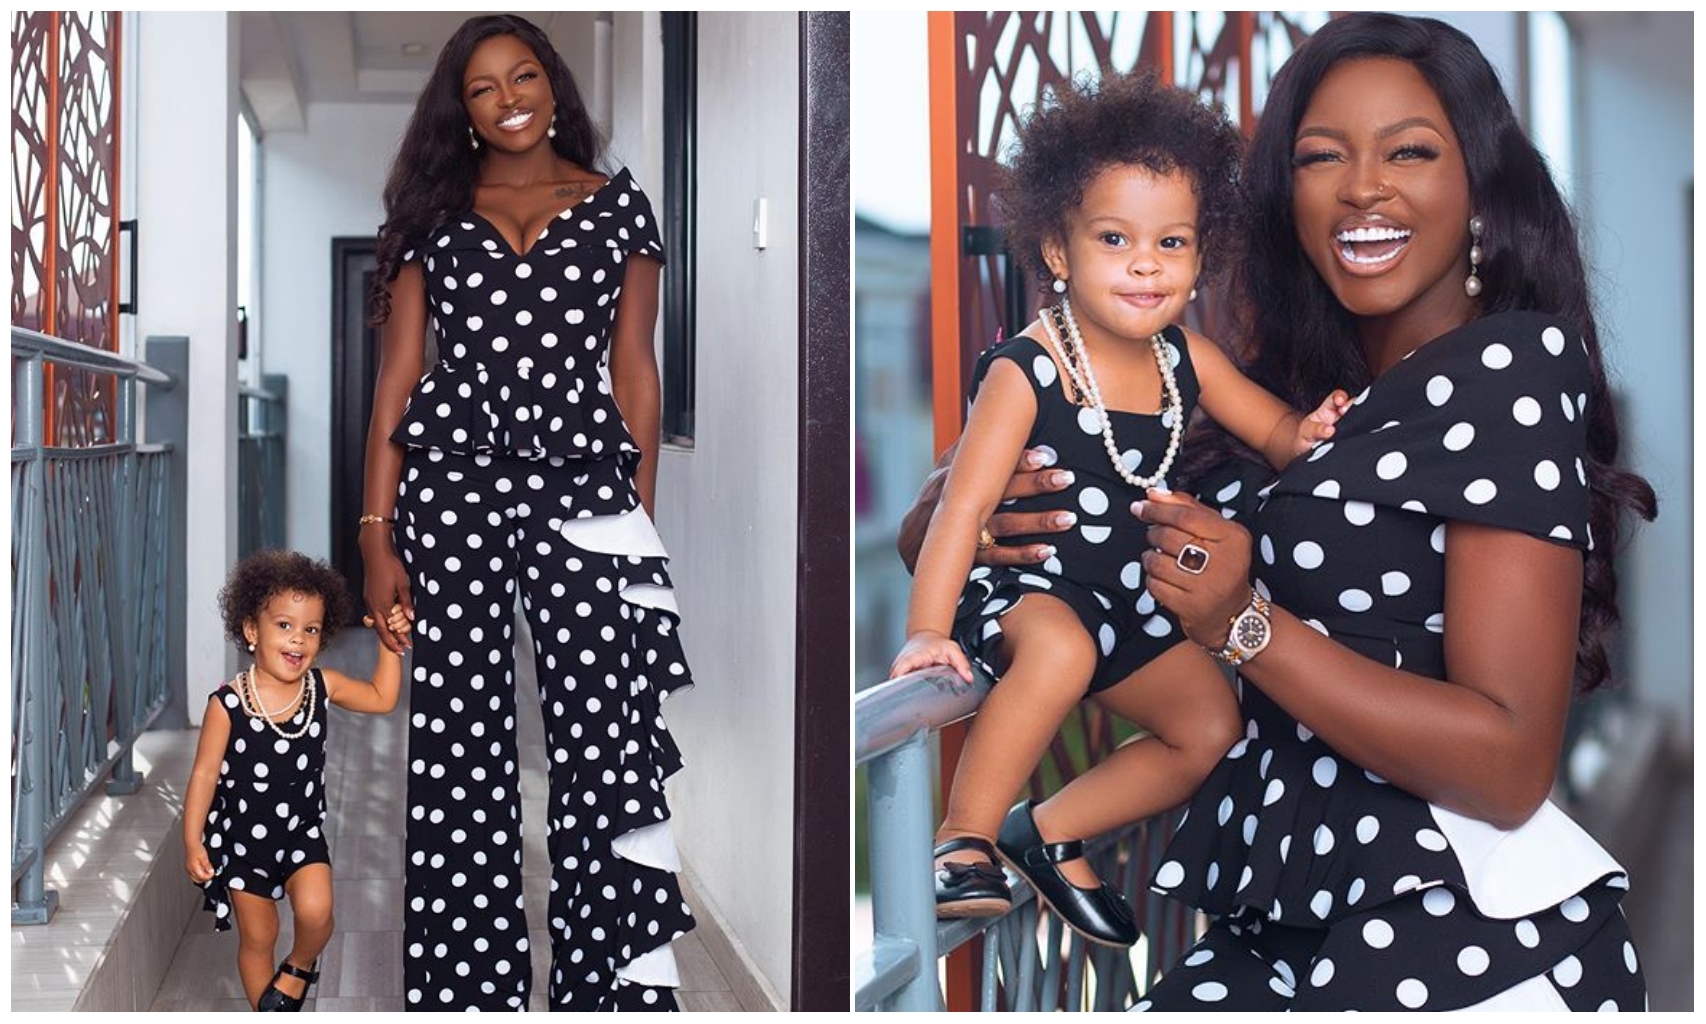 #BBNaija: Ka3na stuns out in matching sexy outfit alongside her daughter (Photos)